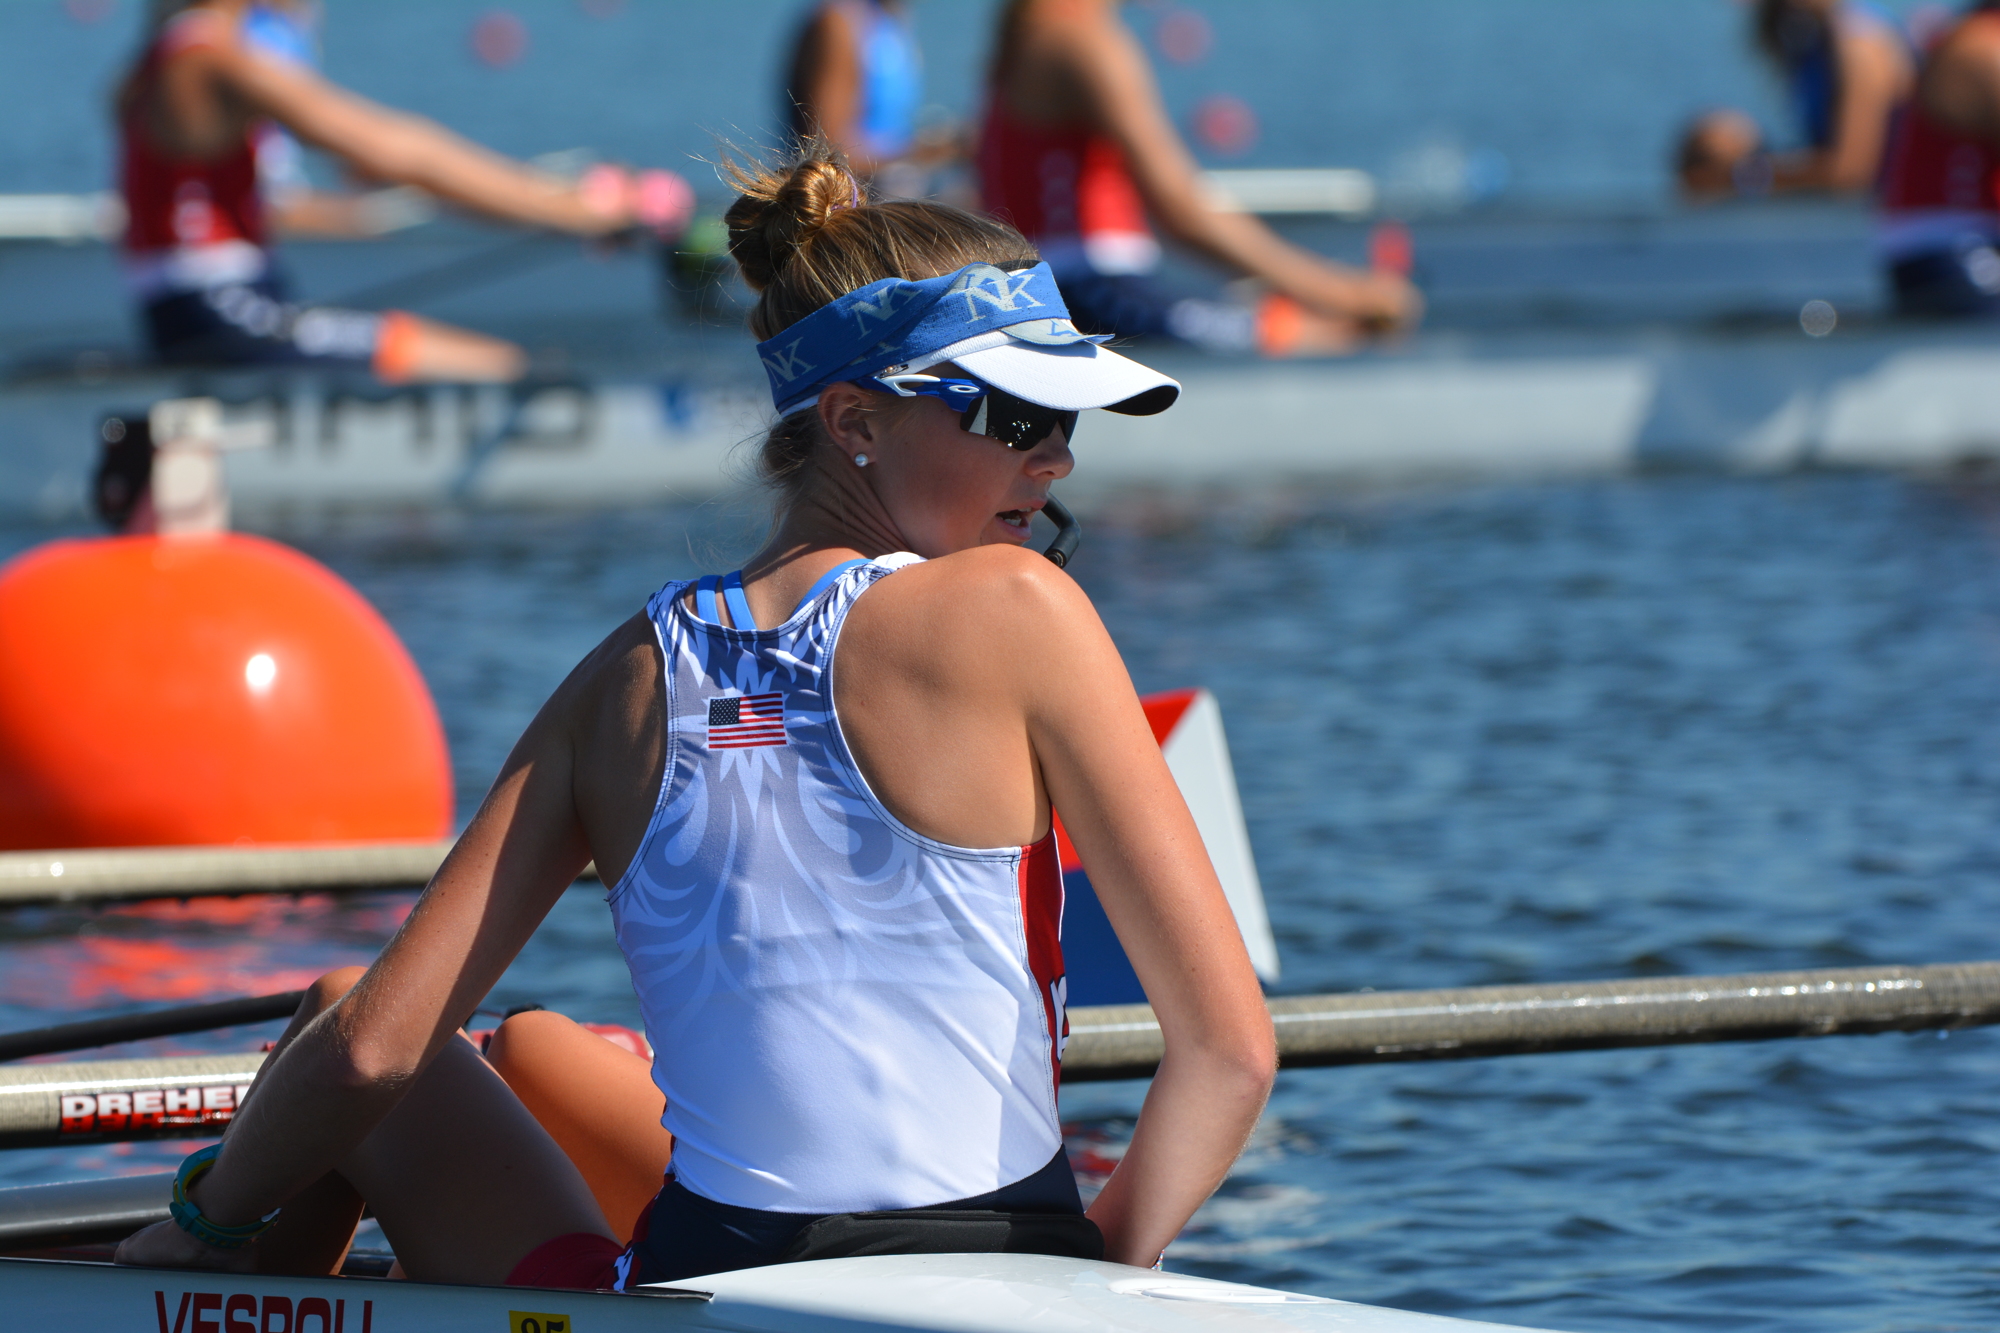 Sydney Edwards made history by being the first American woman to cox a men's boat in international competition.